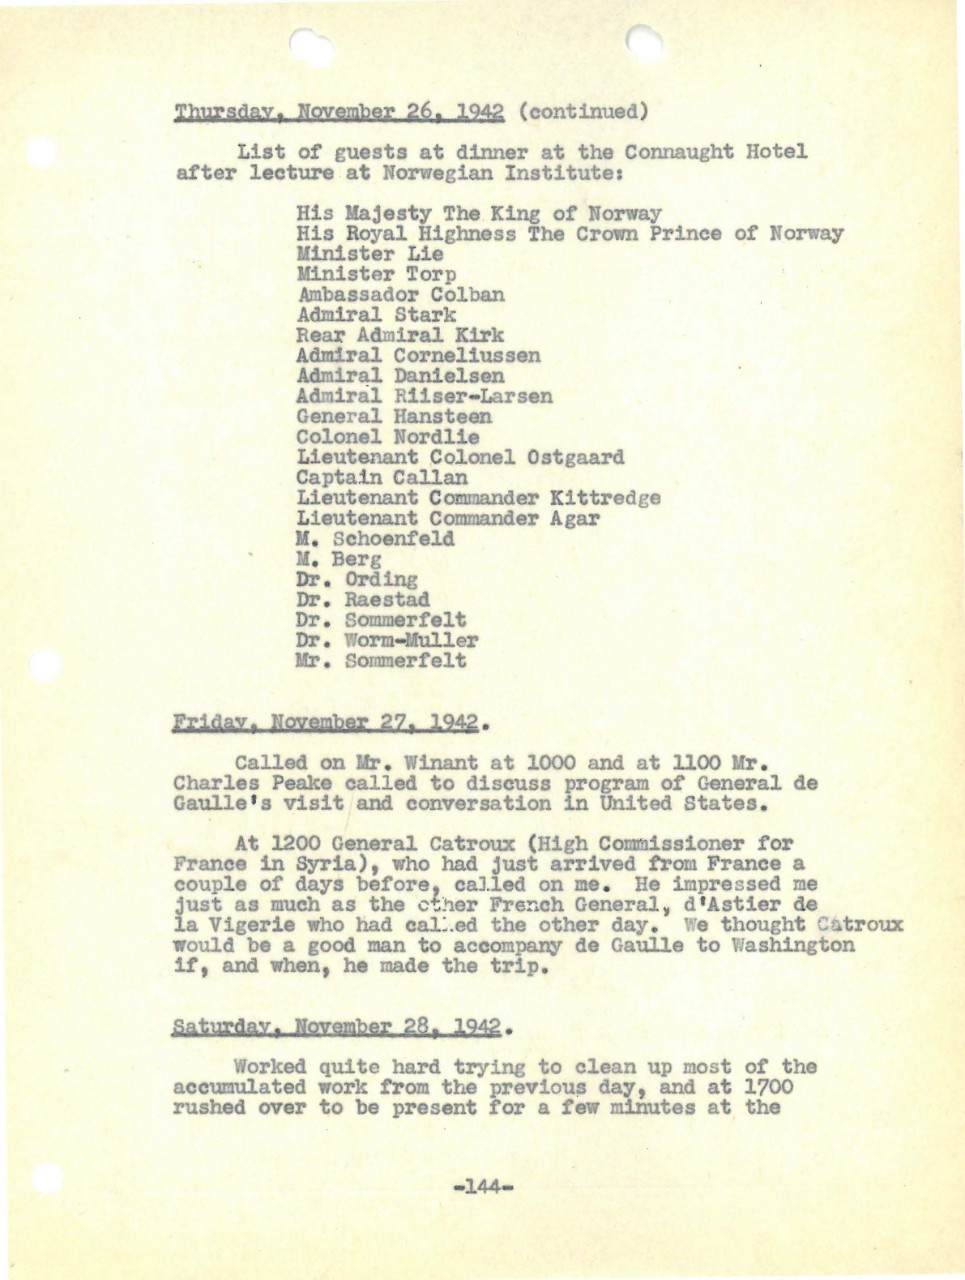 Admiral Stark's Diary Entry for Thanksgiving Day 1942, page 3